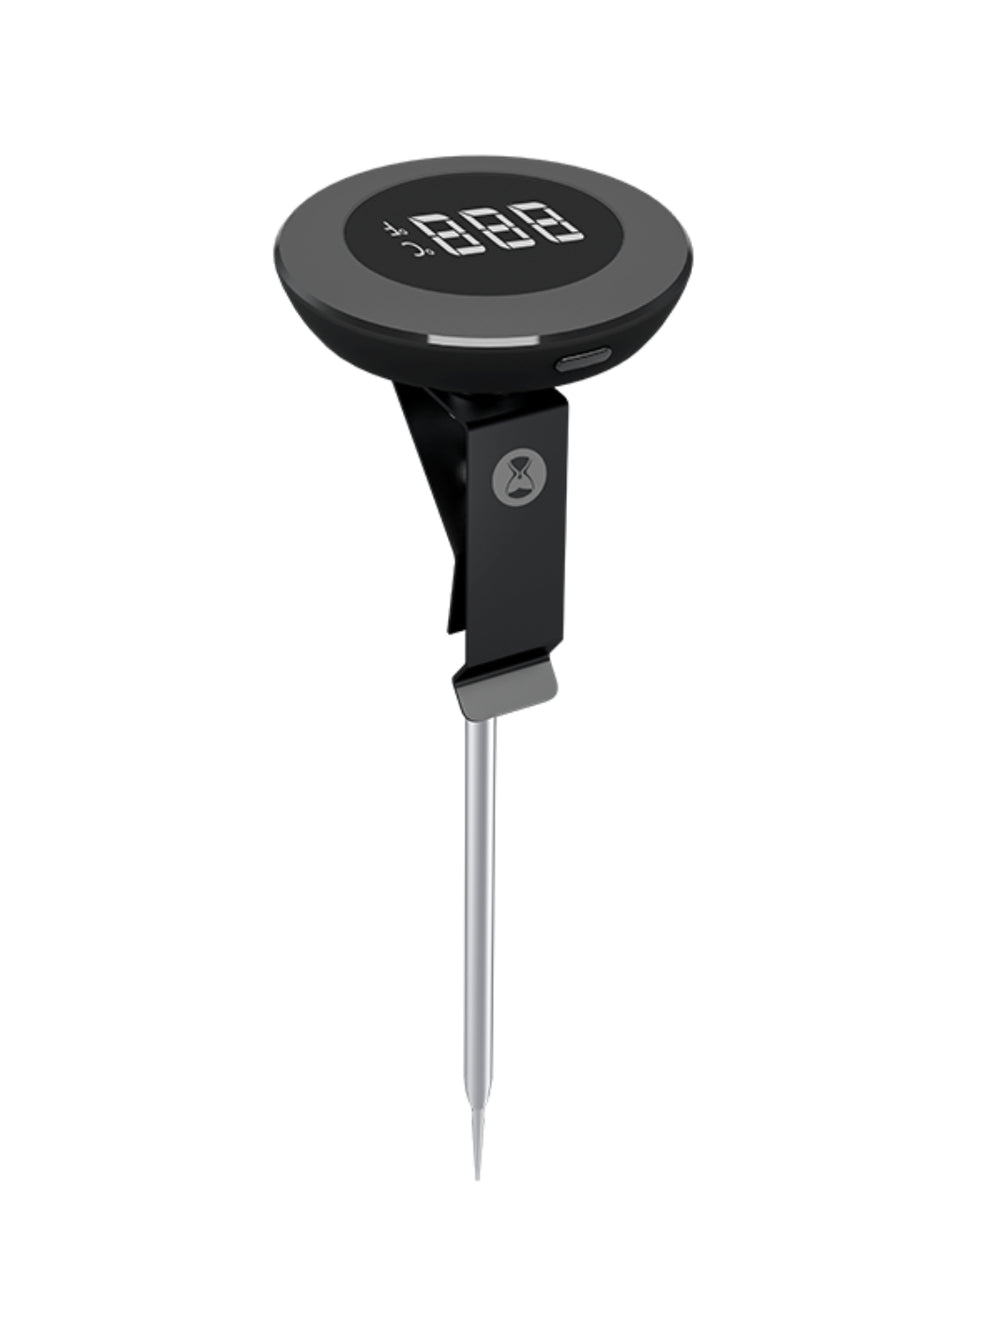 Milk Frother Handheld, [Stepless Speed] USB-C Rechargeable